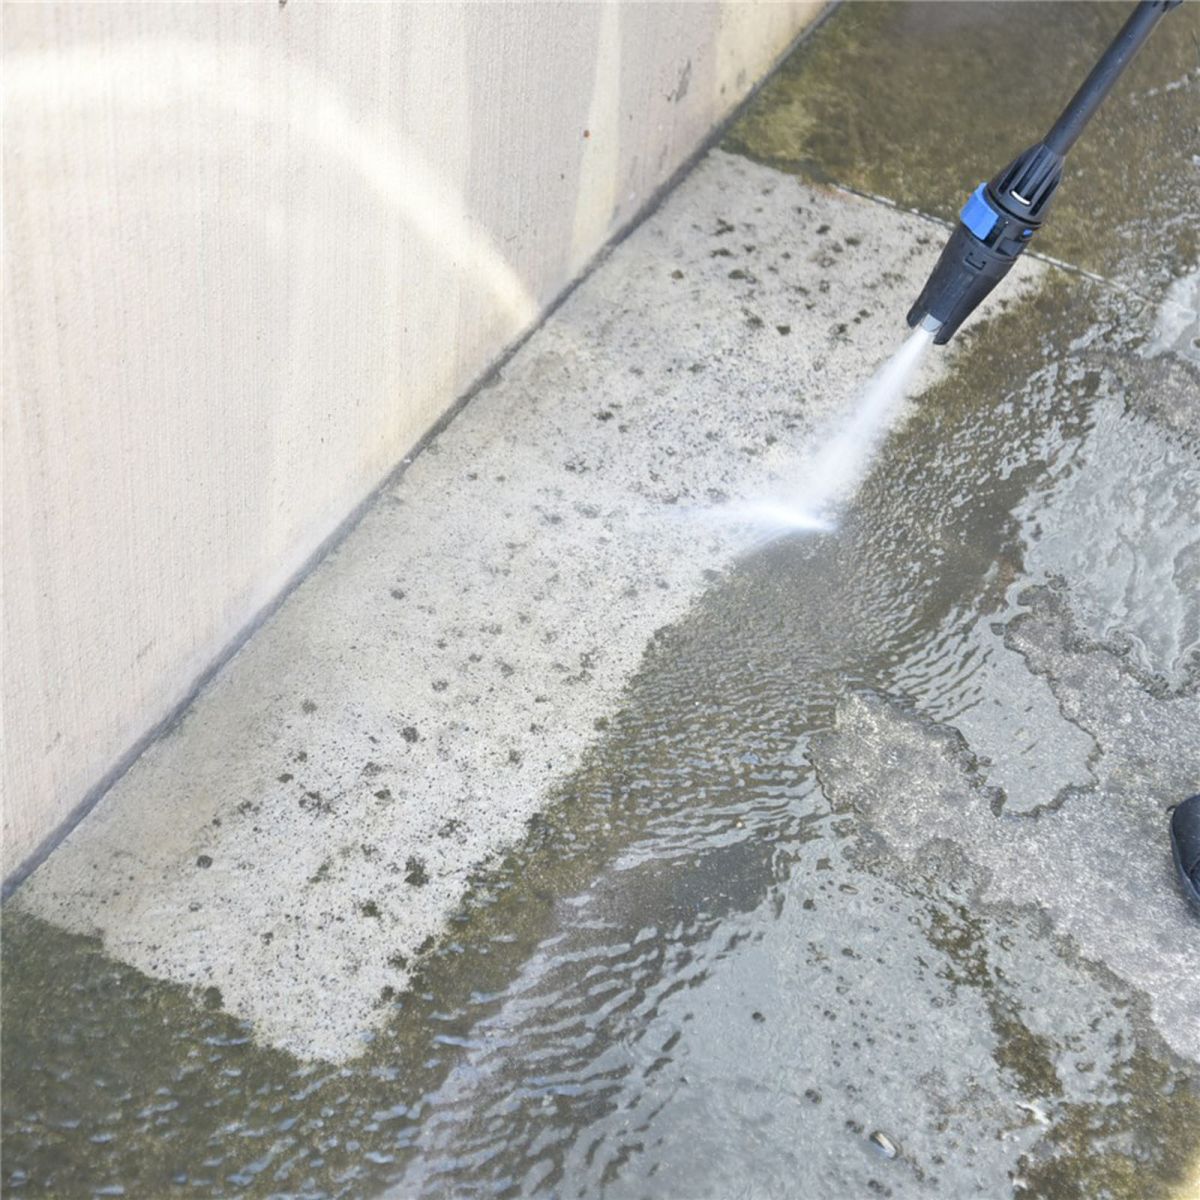 Key points to consider when choosing a pressure washer